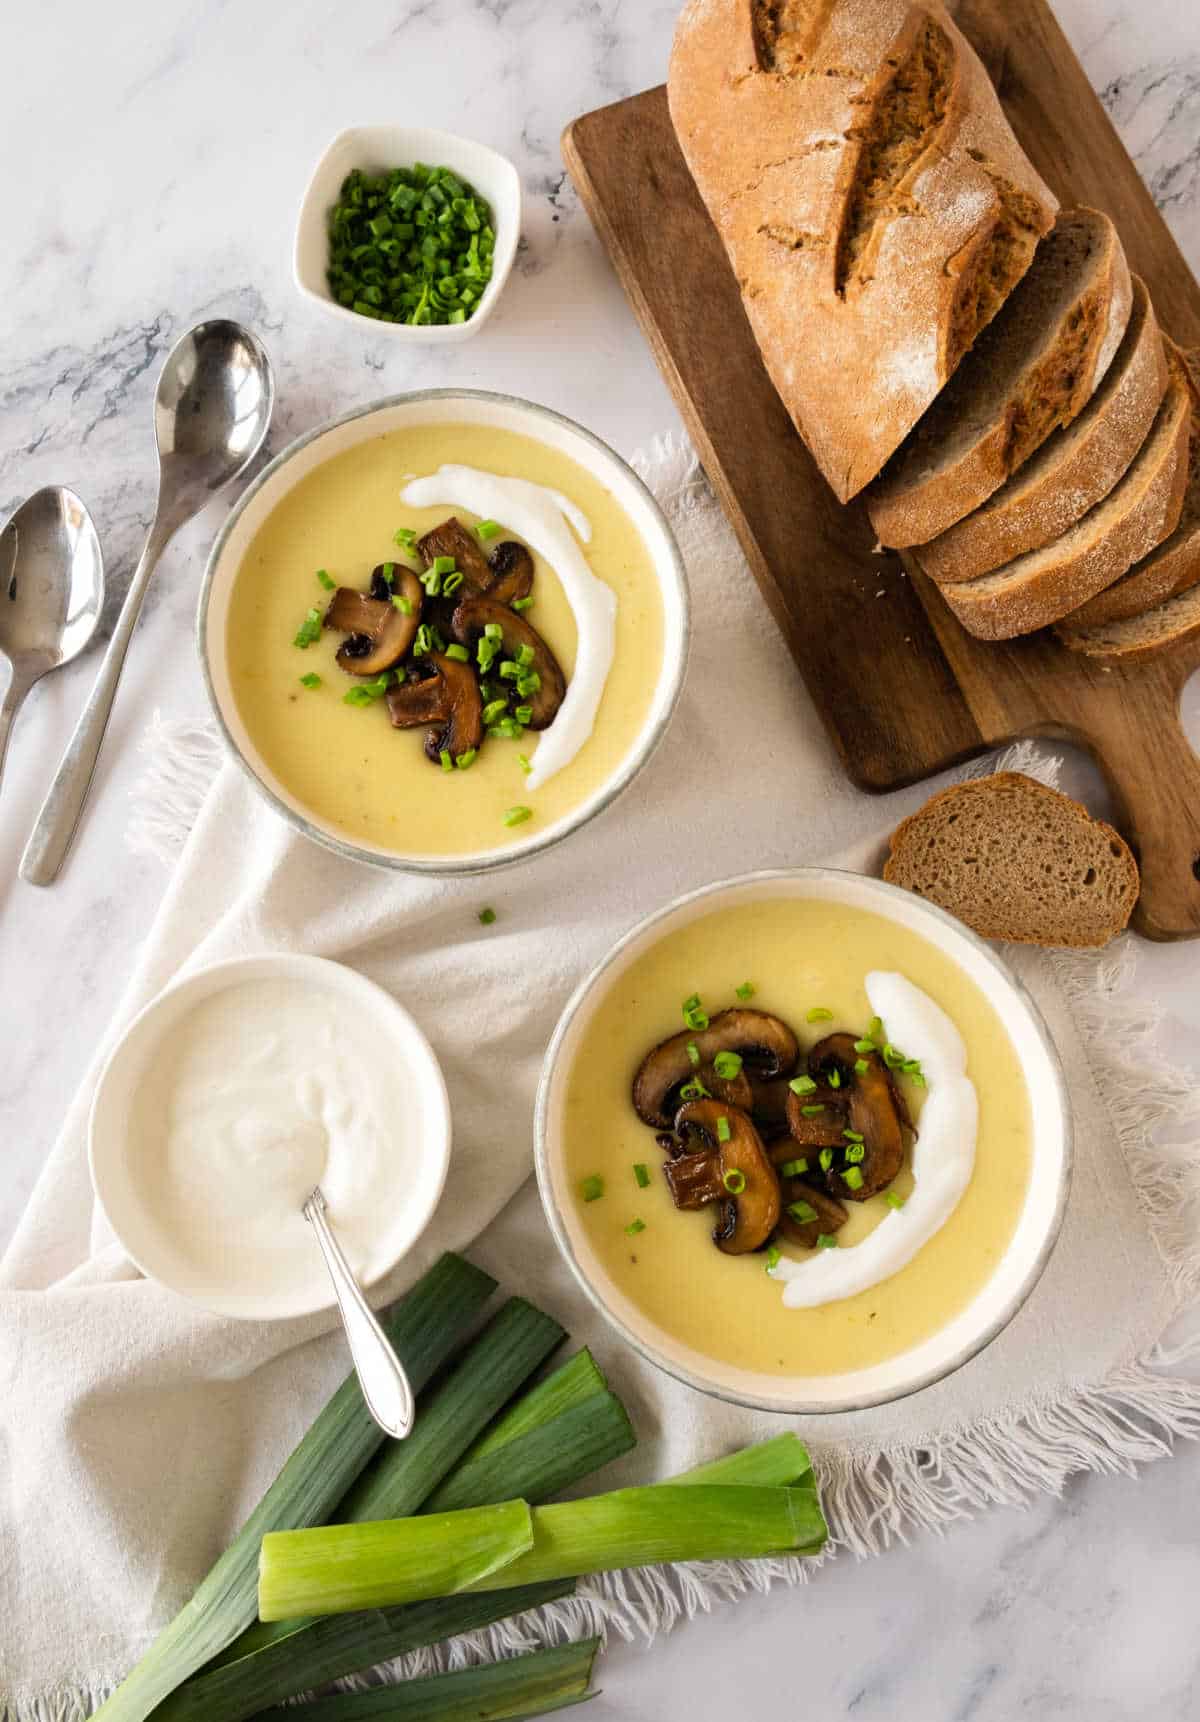 White potato soup bowls with mushrooms, bread loaf on wooden board, white marble with beige linen. Bowl of cream, leeks.